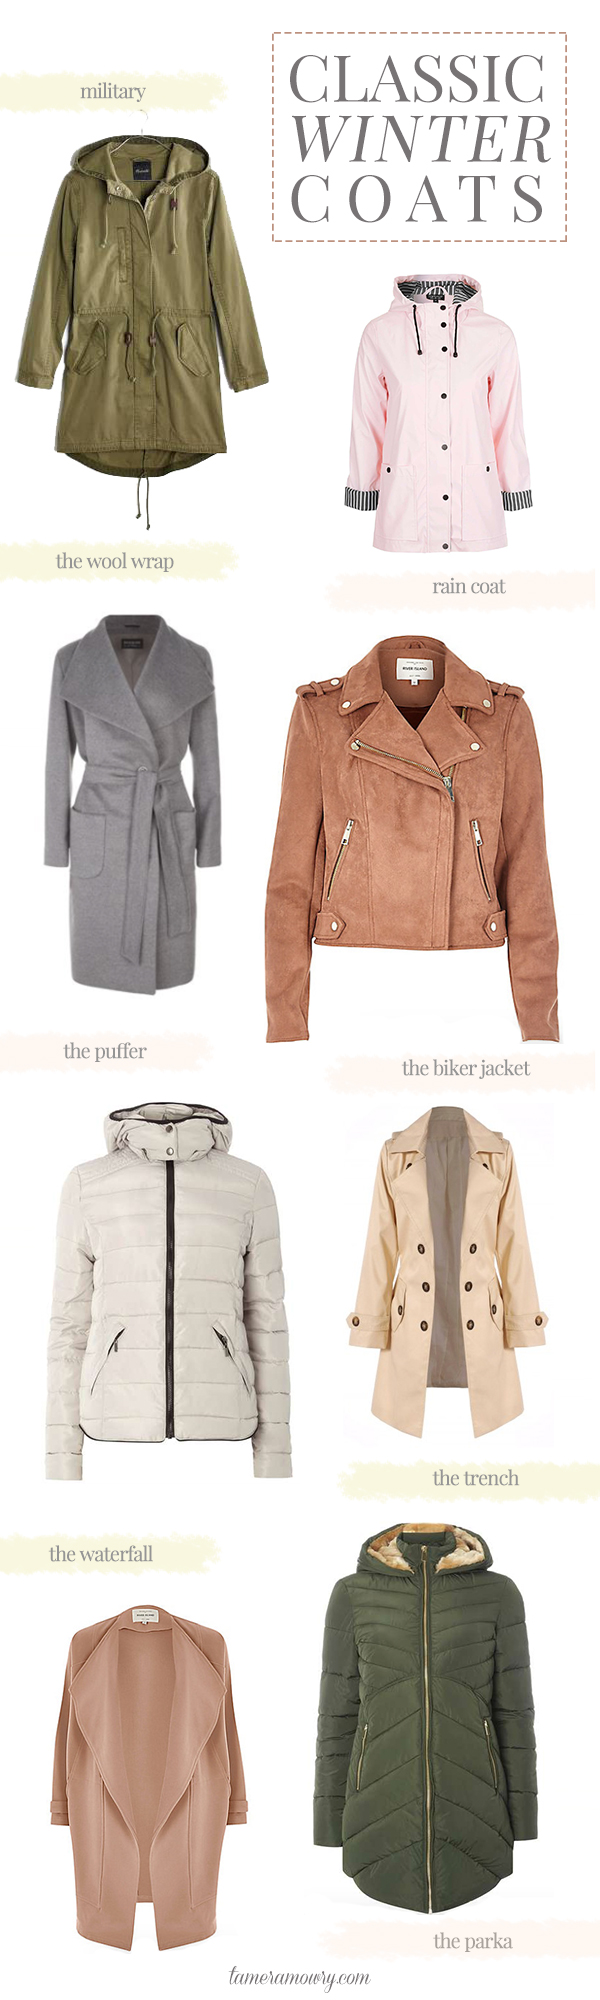 Classic Winter Coats that Never Go Out of Style - Tamera Mowry